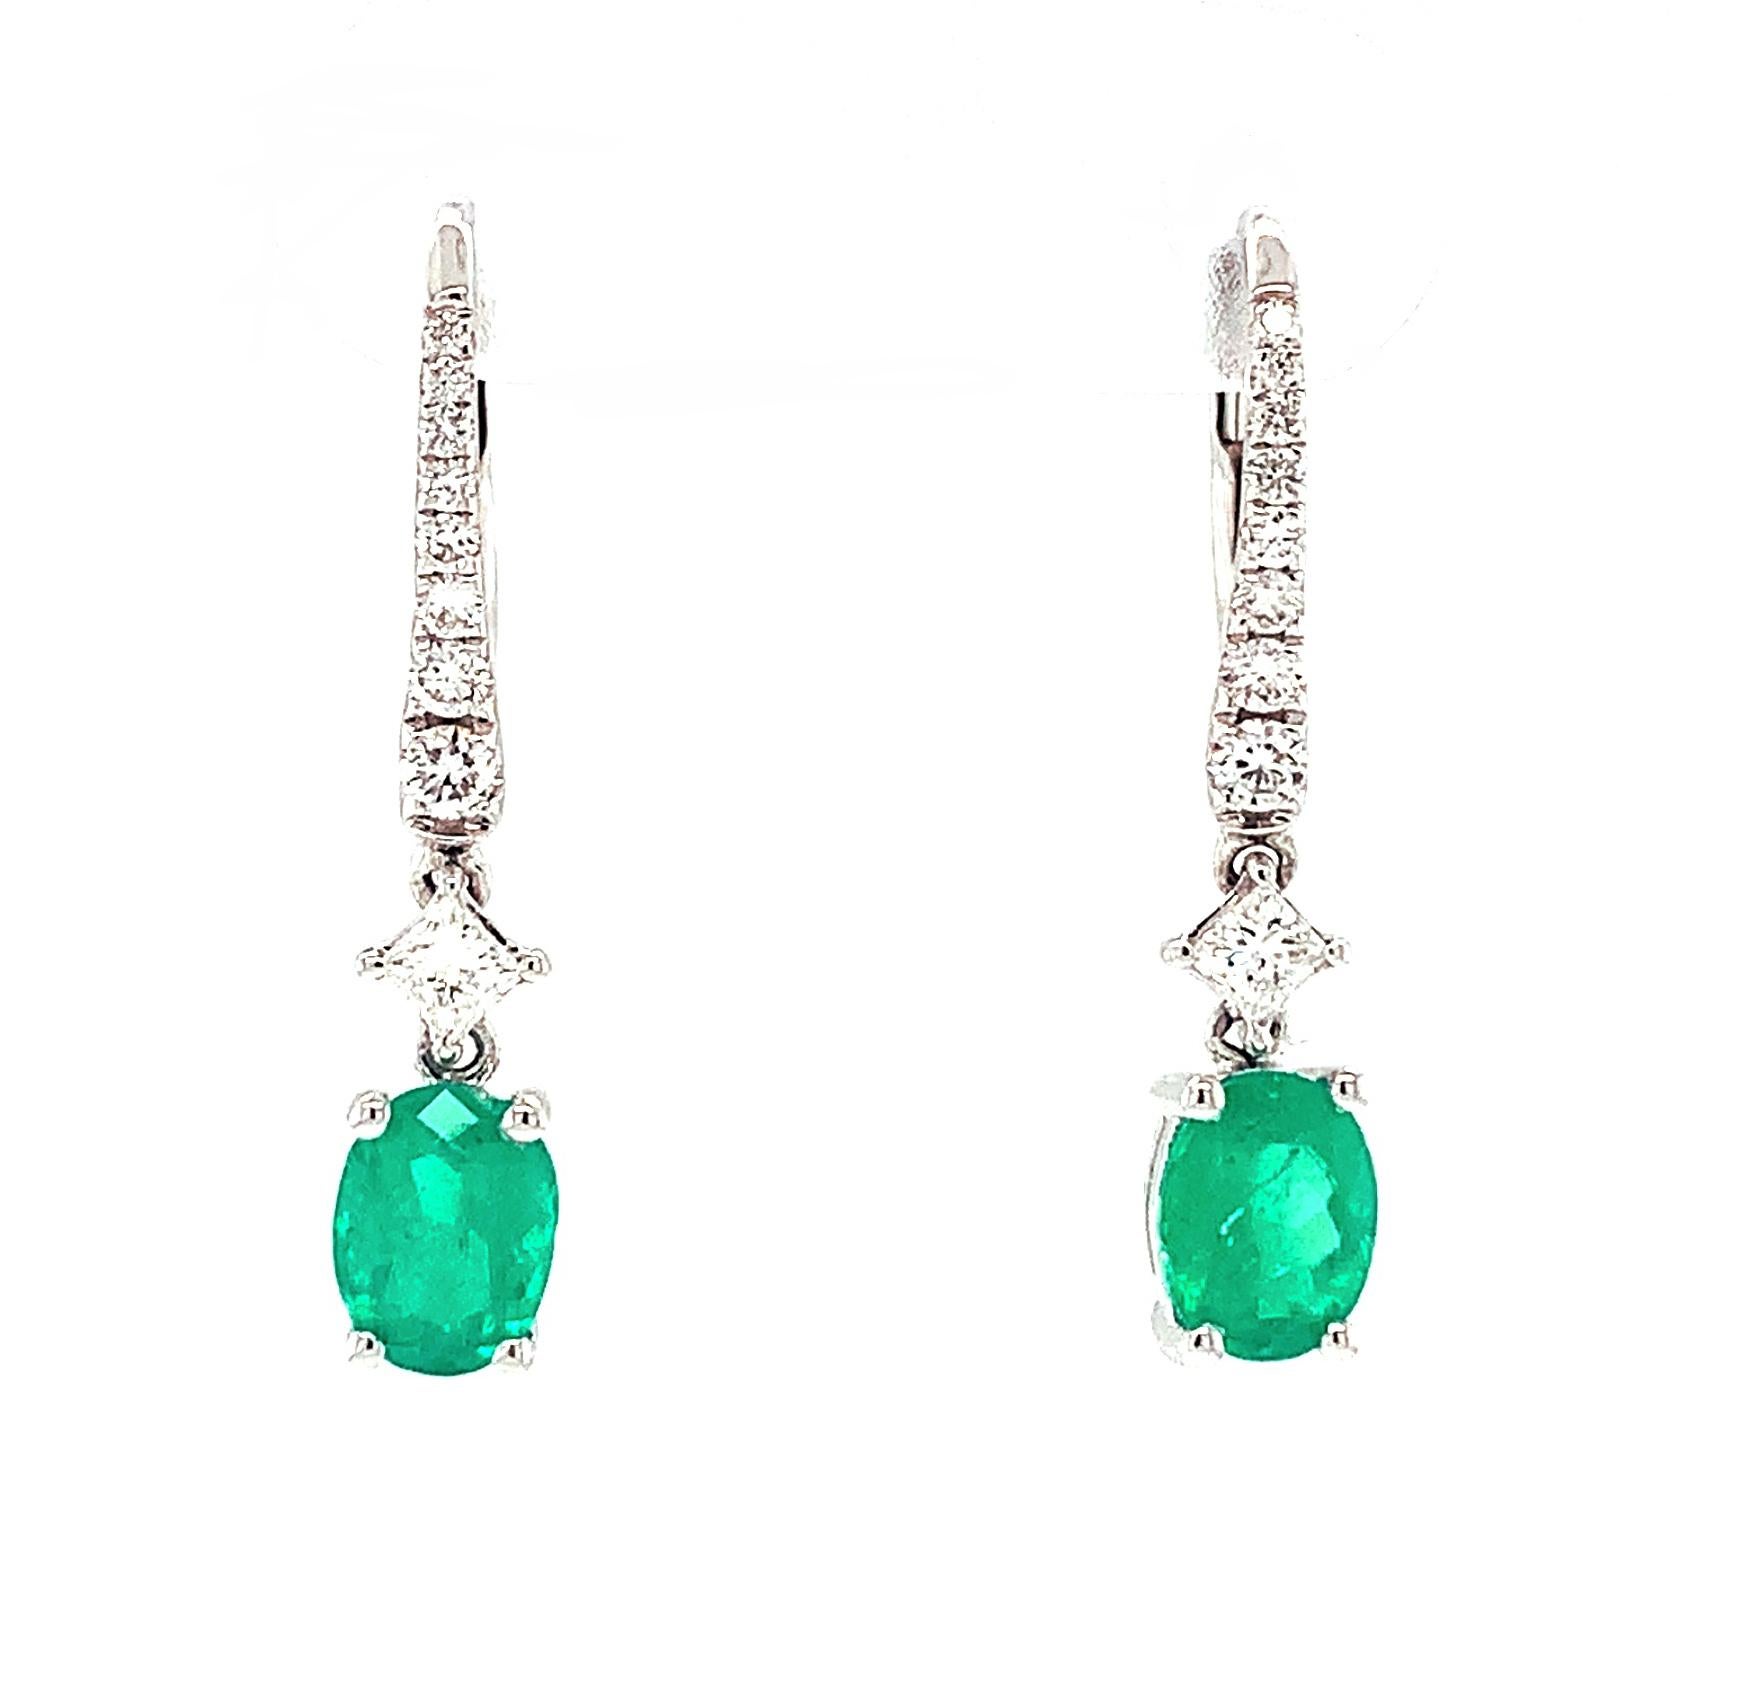 Bright green emeralds are featured in these pretty drop earrings set in 18k white gold. The gorgeous, matching emeralds have a combined weight of 1.15 carats and are combined with graduating round brilliant-cut diamonds set in elegant lines leading